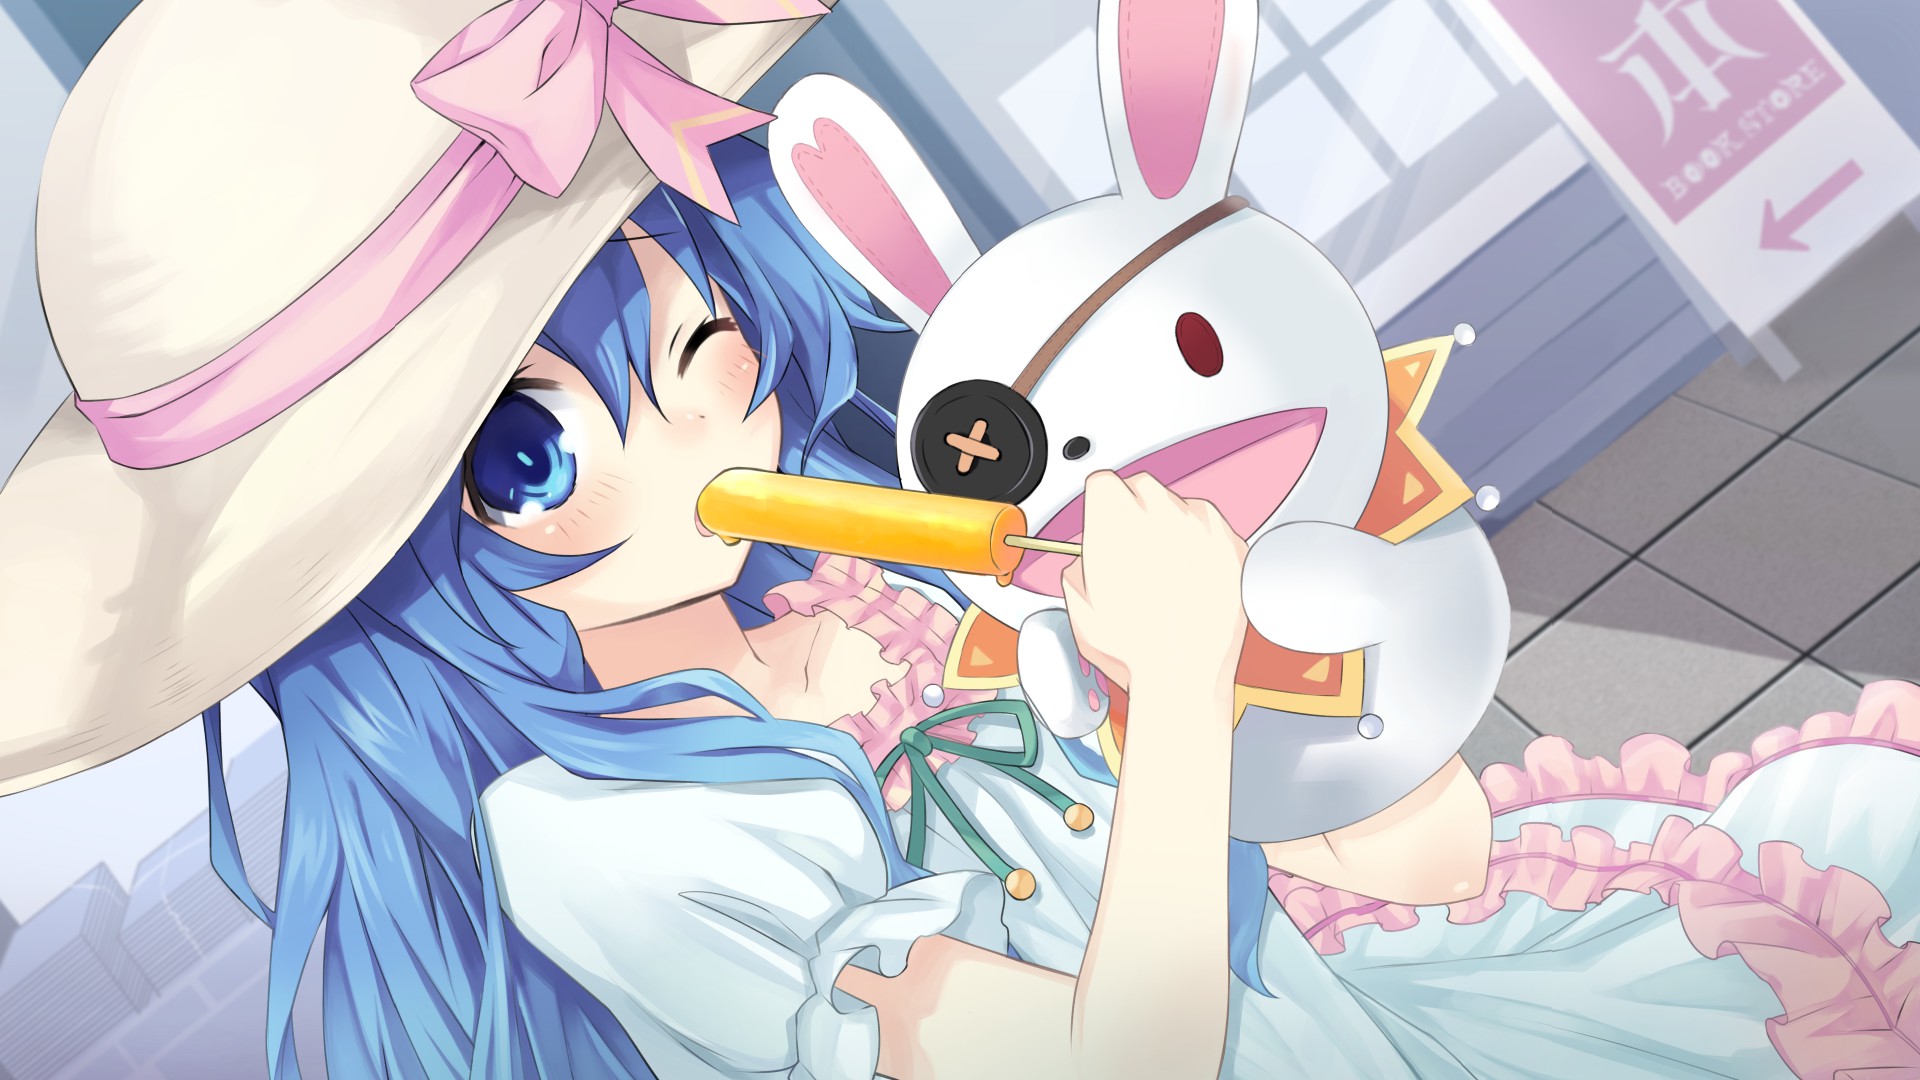 Review of Date A Live